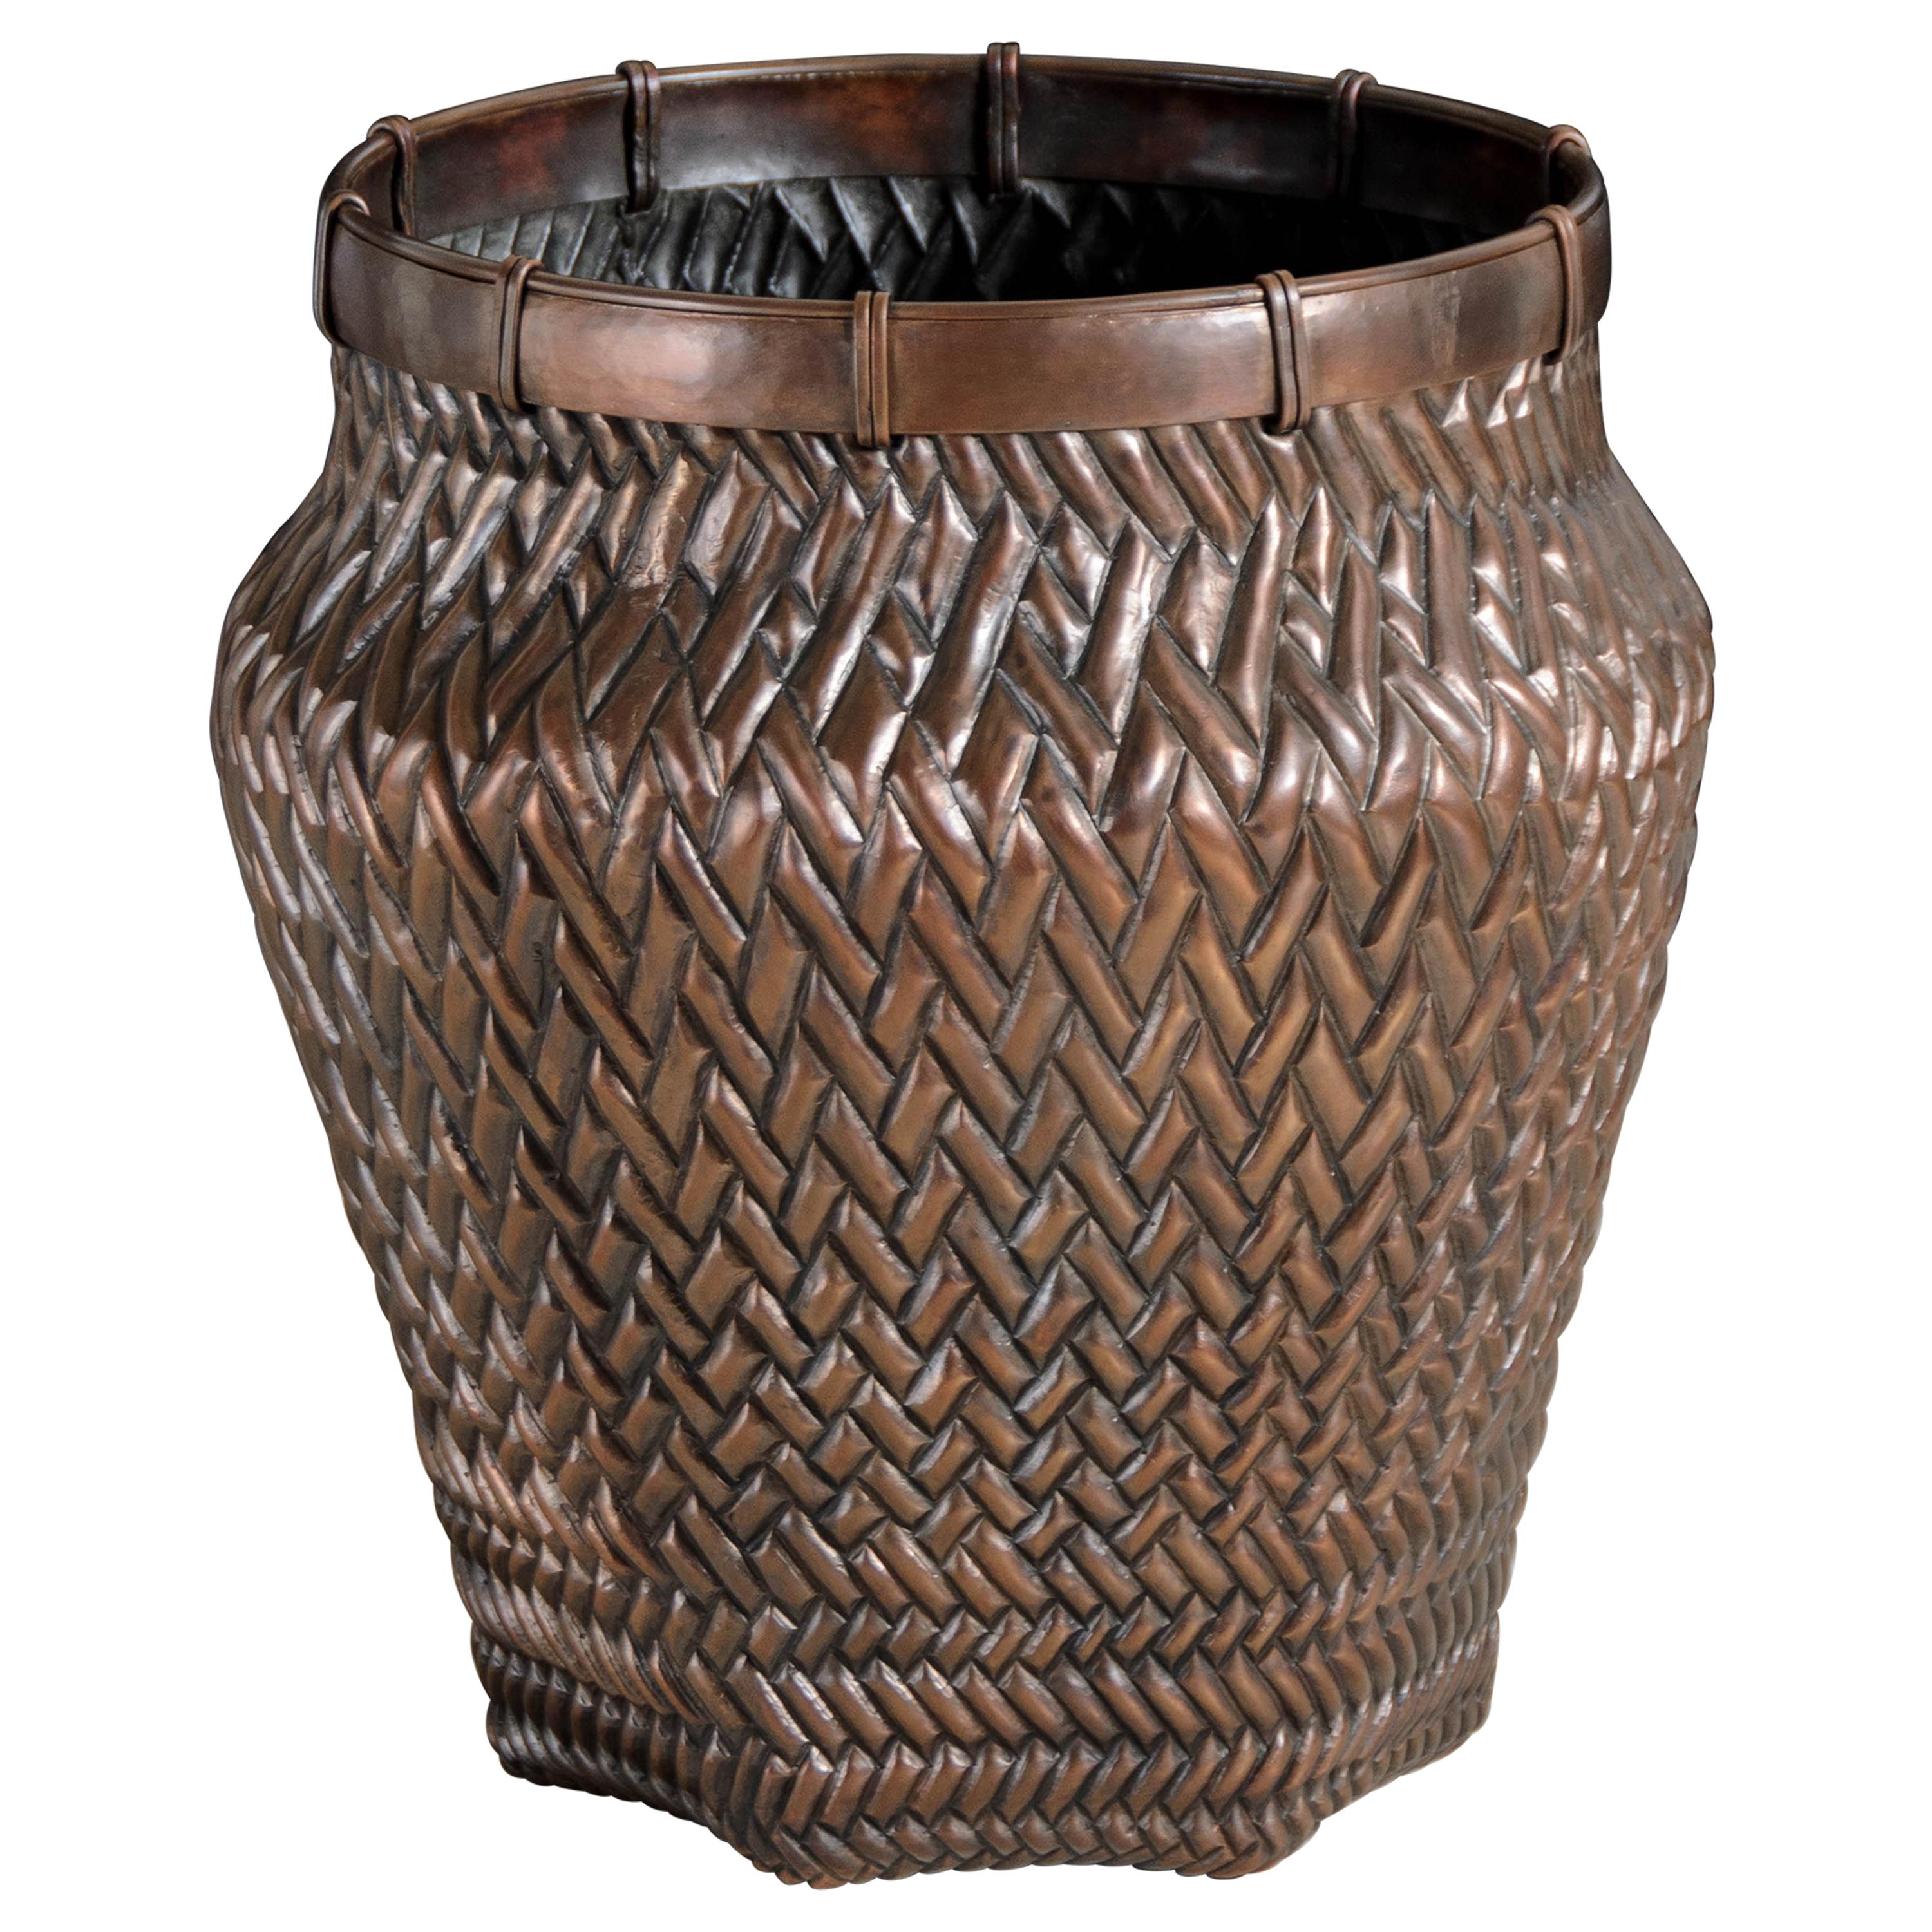 Contemporary Weave Design Vase in Copper by Robert Kuo, Limited Edition